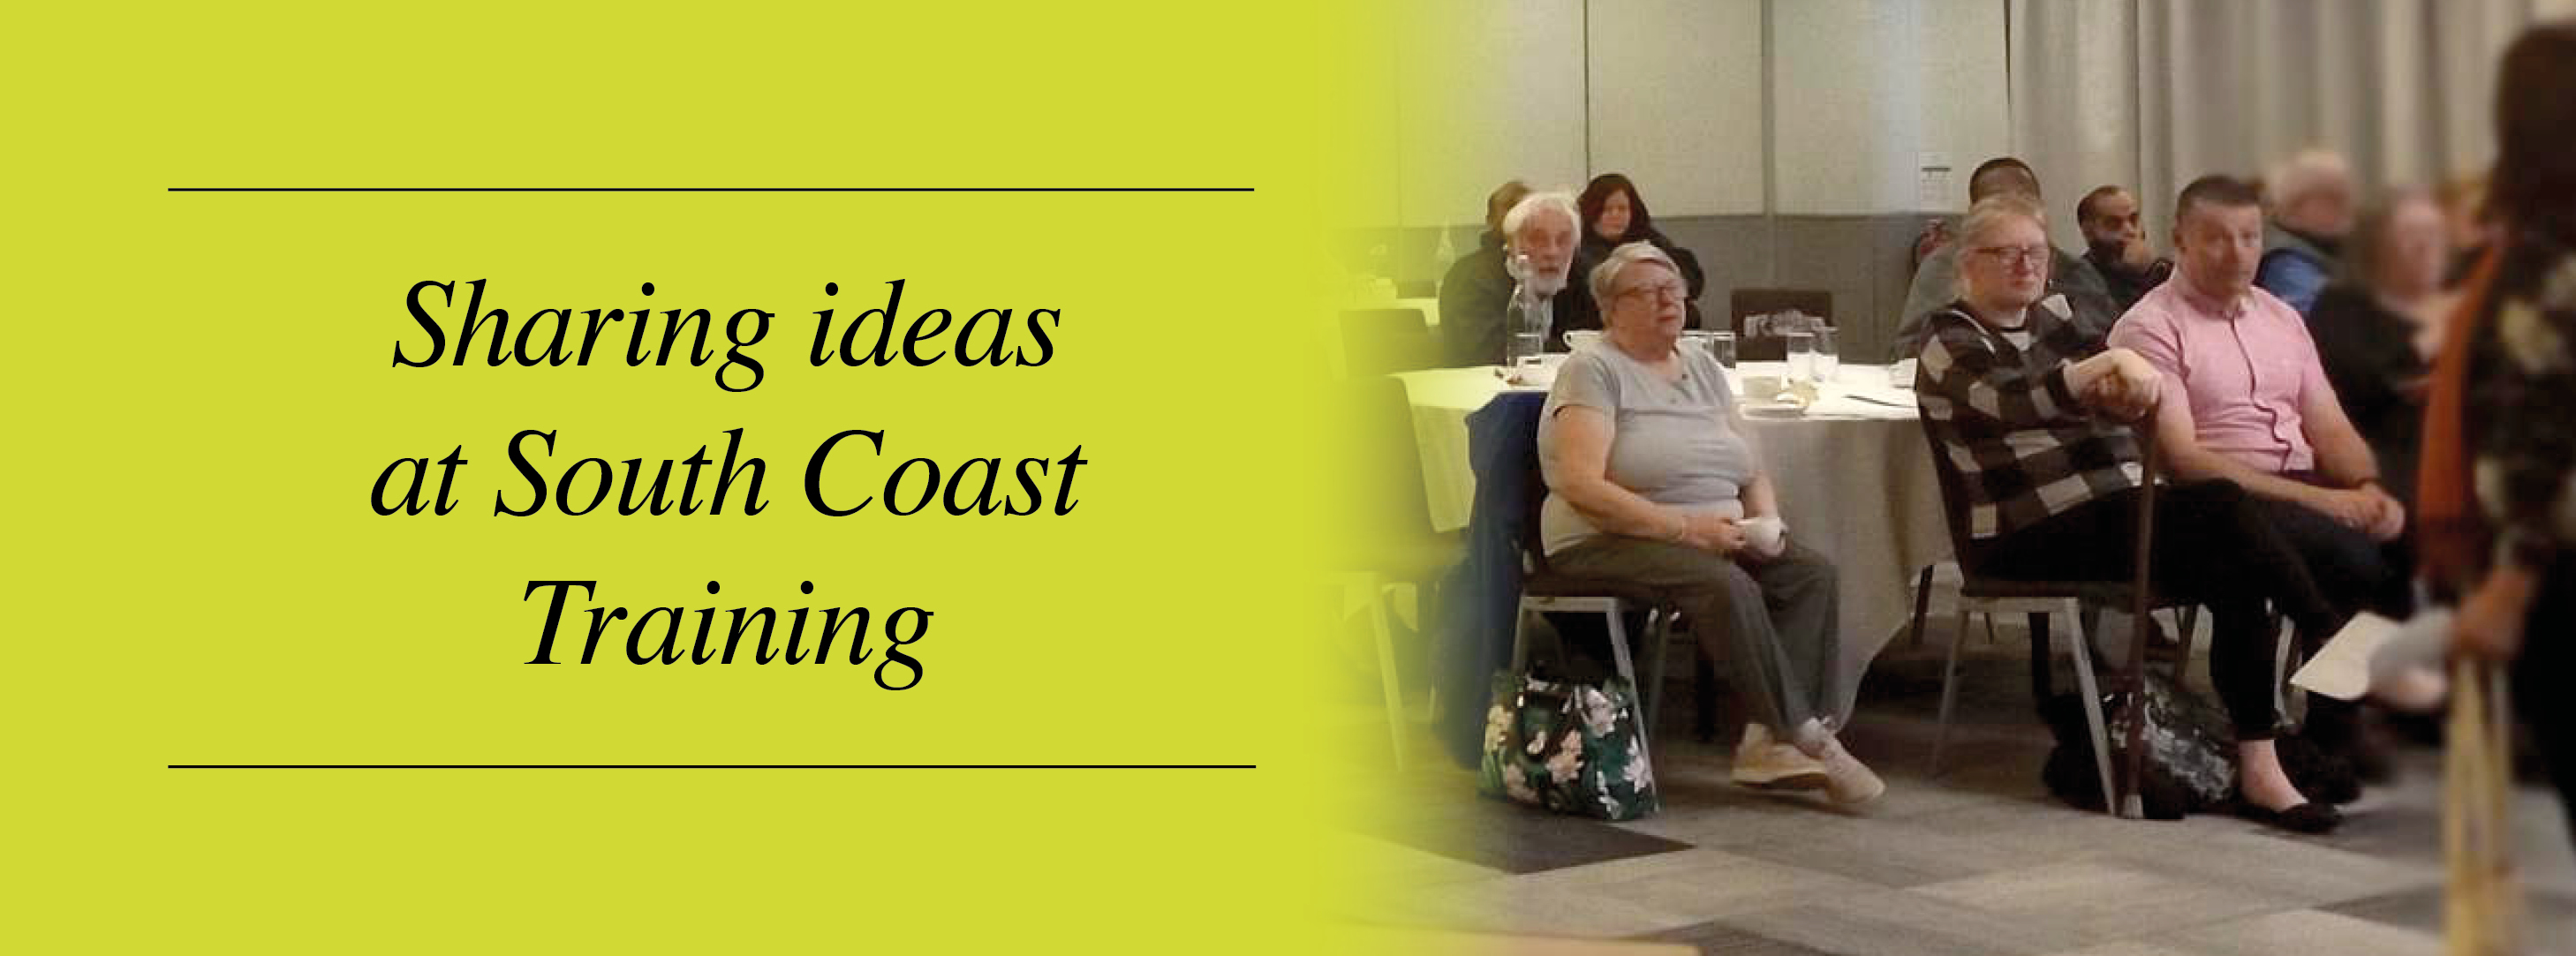 Text "Sharing ideas at South Coast Training" showing some conference attendees